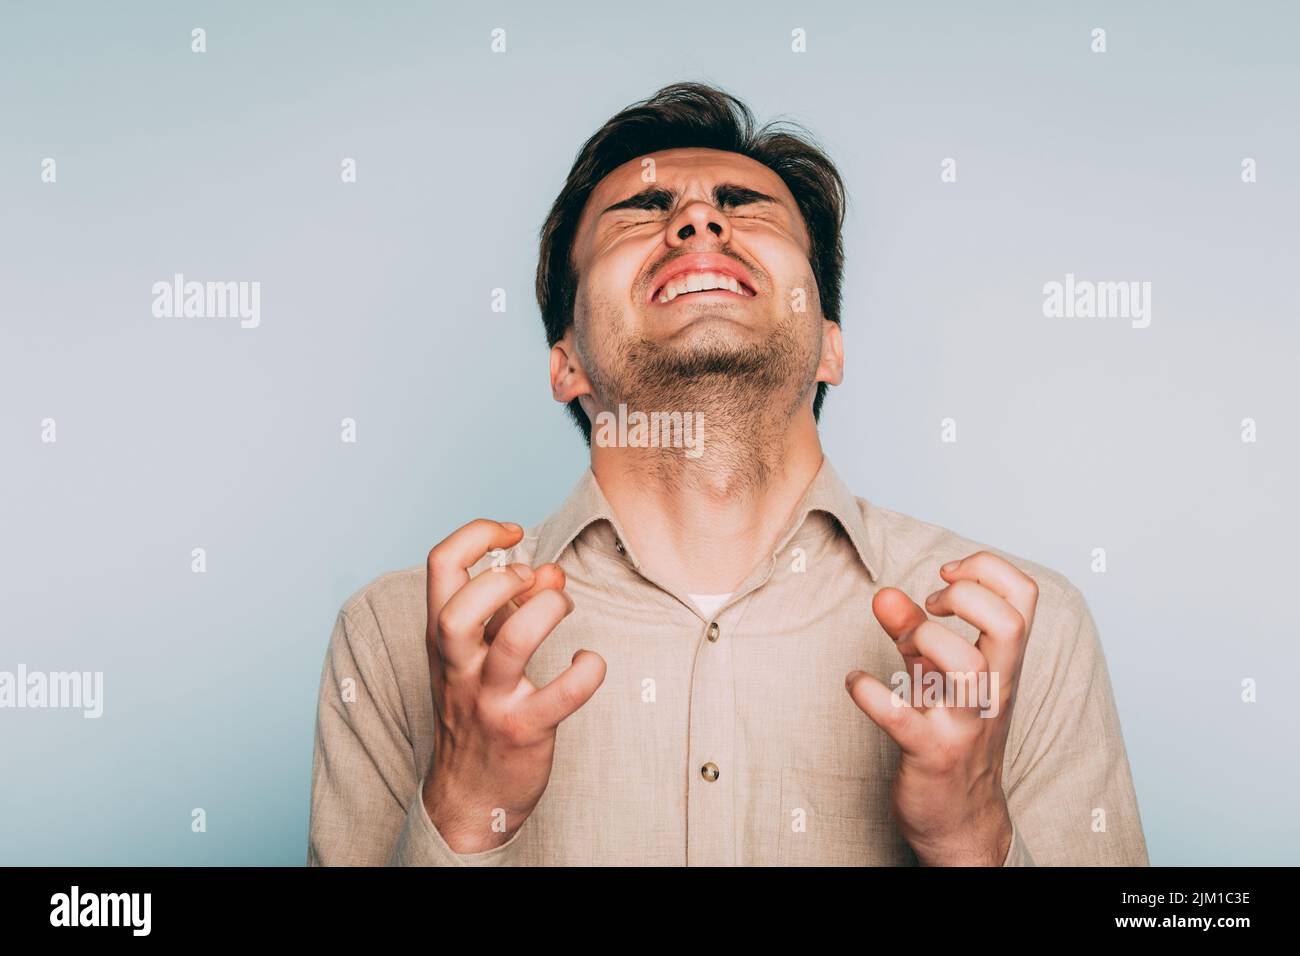 uncontrollable anger helplessness despair man face Stock Photo